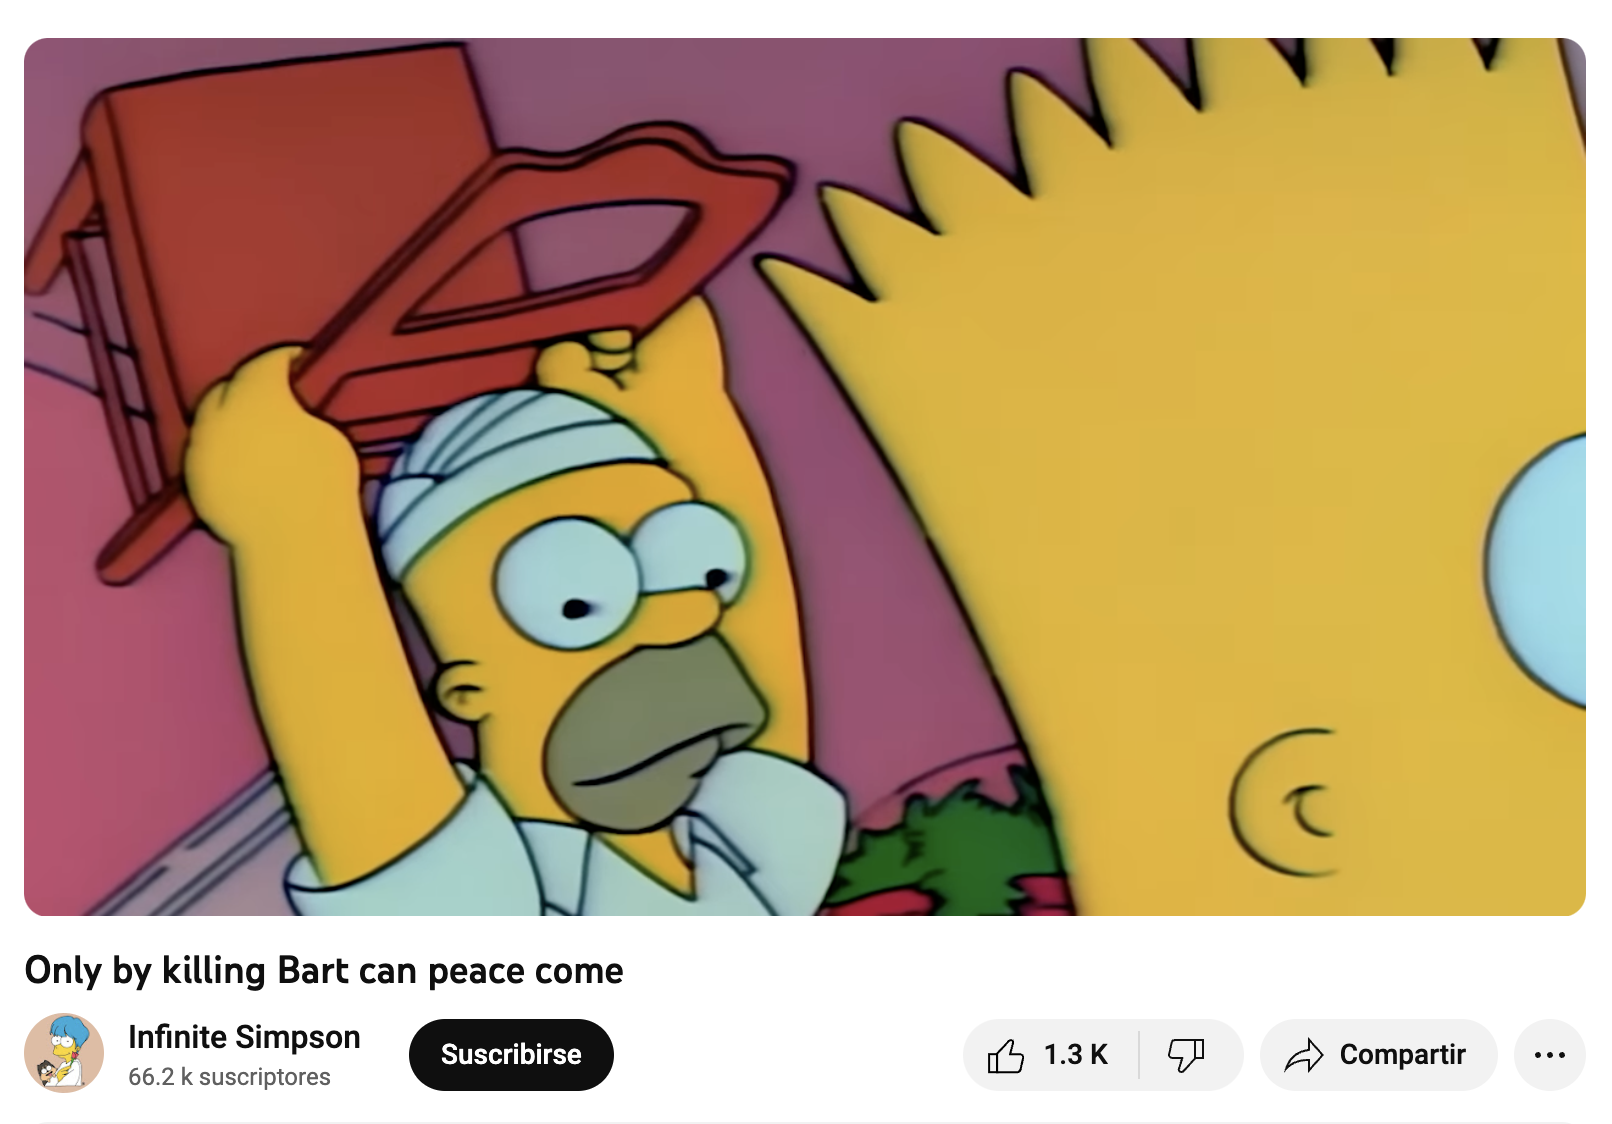 Still from a simpsons episode of Homer about to Hit bart with a chair. The title reads: Only by killing Bart can peace come. The channel is called: Infinite Simpson